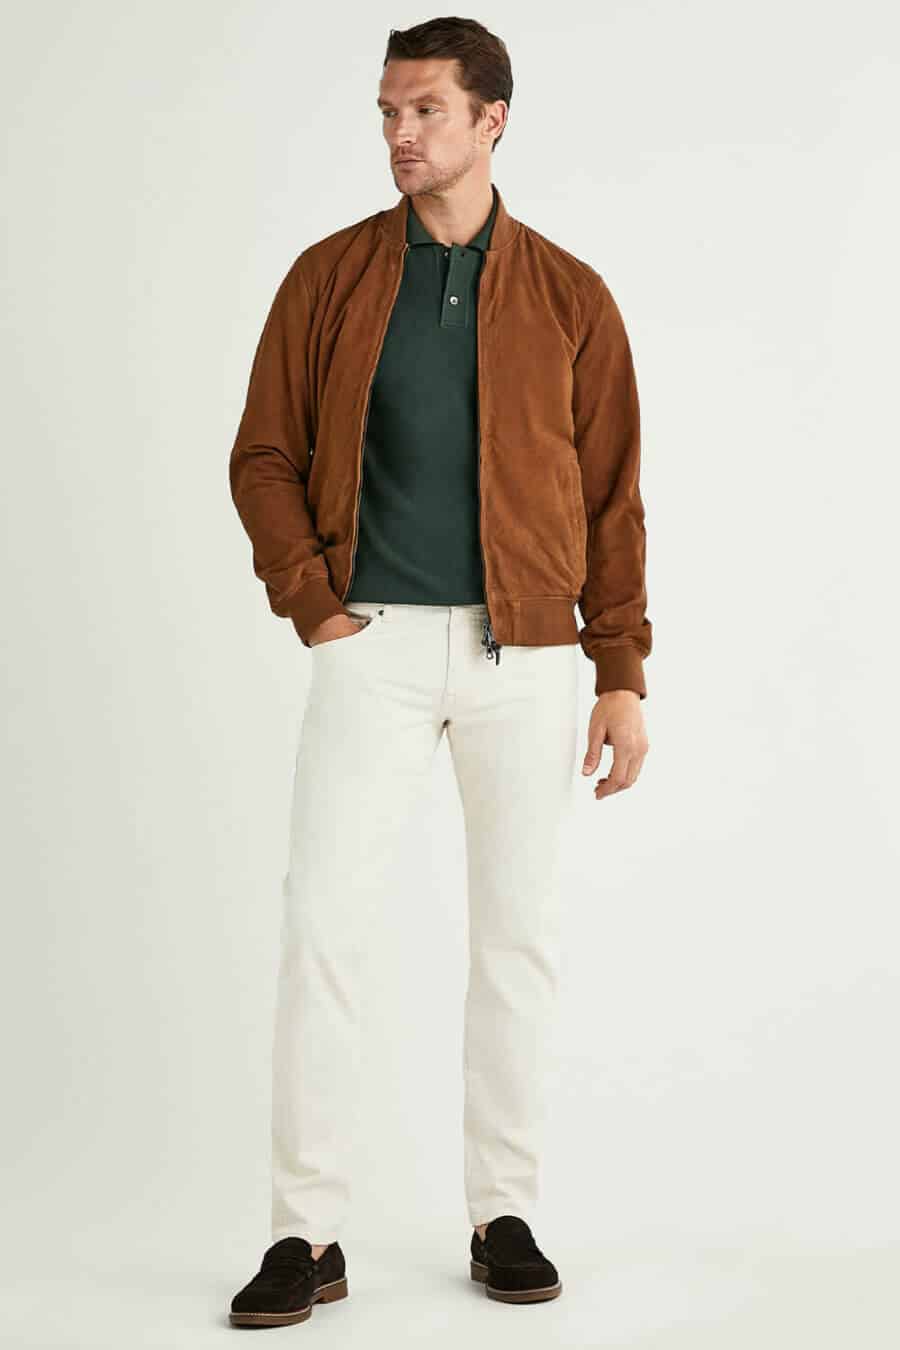 Men's green polo shirt, brown suede bomber and white pants outfit